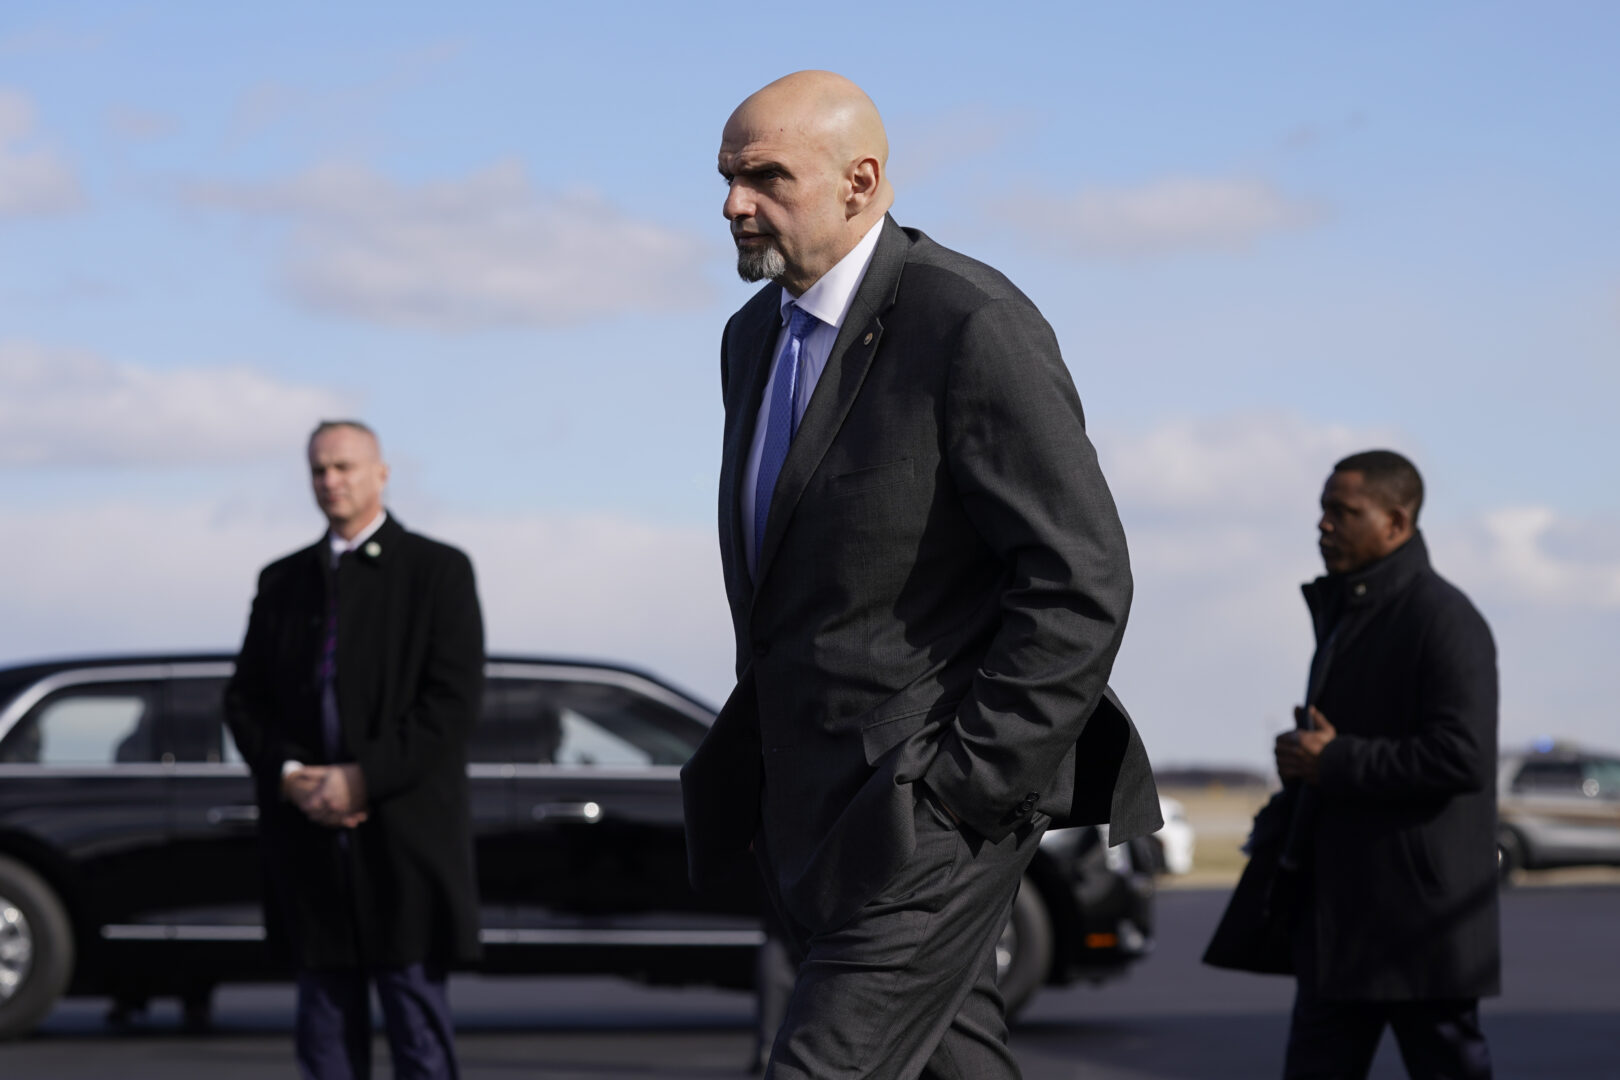 FILE - Sen. John Fetterman, D-Pa., walks to a motorcade vehicle after stepping off Air Force One behind President Joe Biden, Feb. 3, 2023, at Philadelphia International Airport in Philadelphia. On Thursday, Feb. 16, Fetterman's office announced that the senator had checked himself into the hospital for clinical depression.